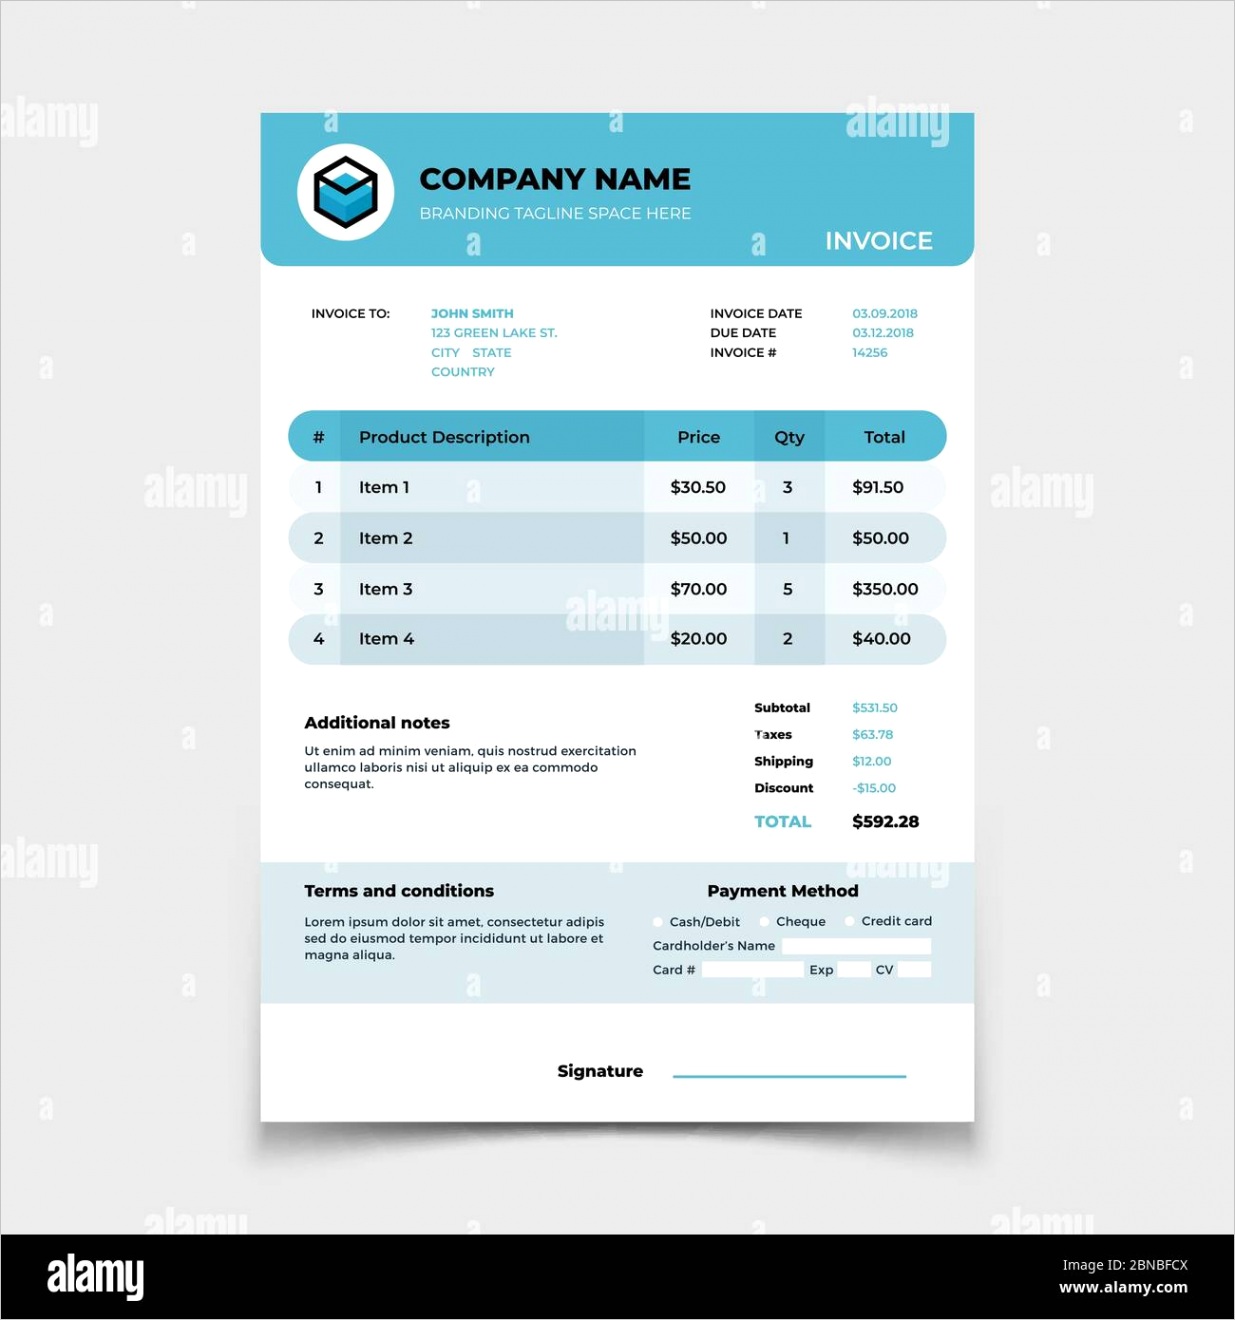 invoice template bill form bookkeeping vector document design vector accounting service price calculation illustration image ml